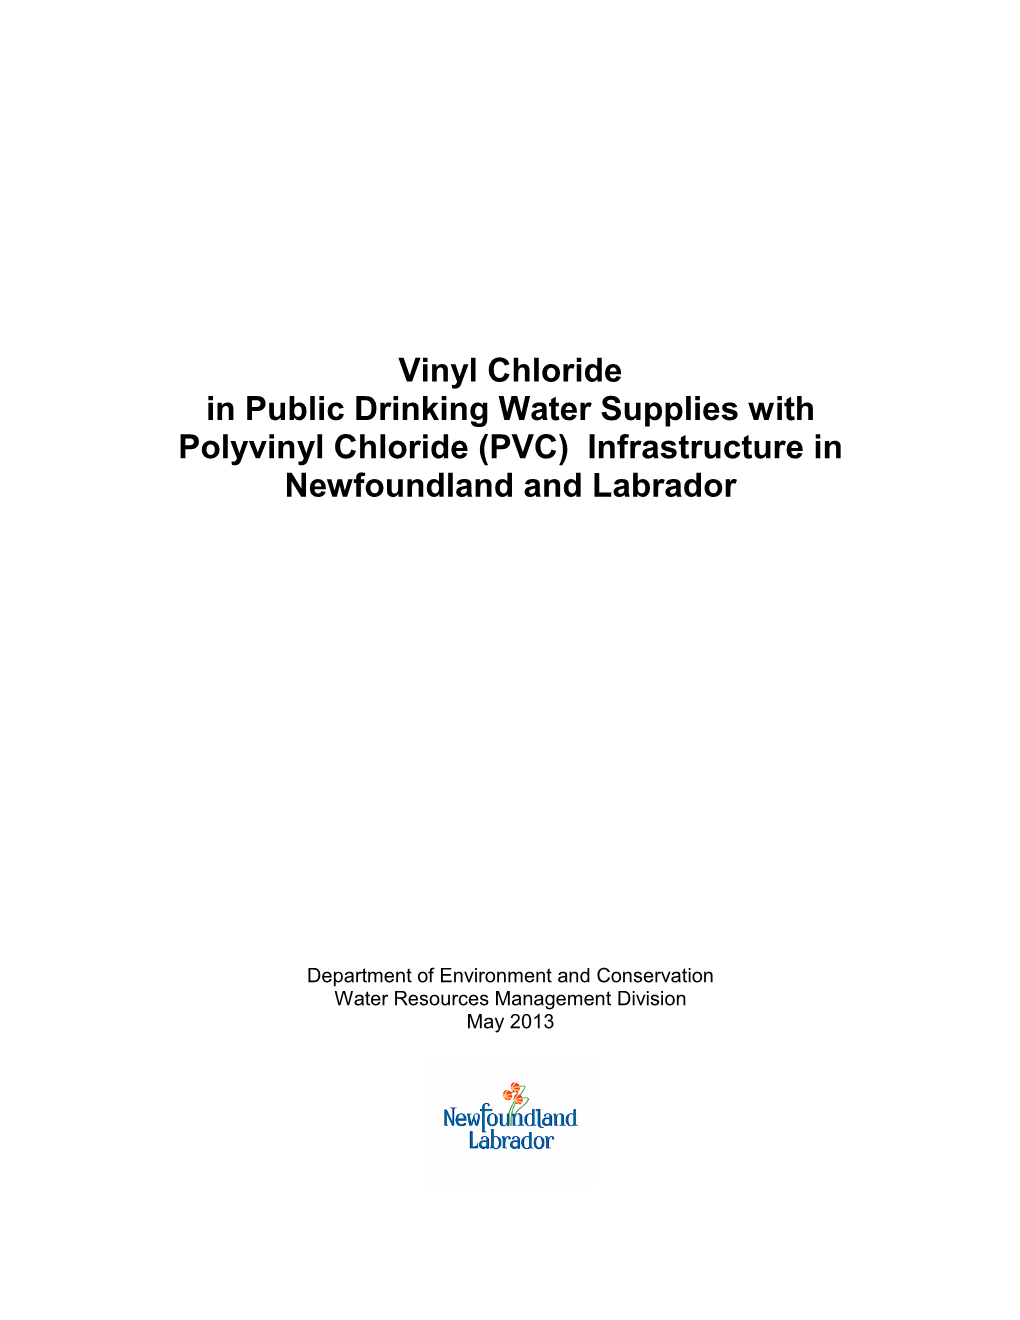 Vinyl Chloride in Public Drinking Water Supplies with Polyvinyl Chloride (PVC) Infrastructure in Newfoundland and Labrador